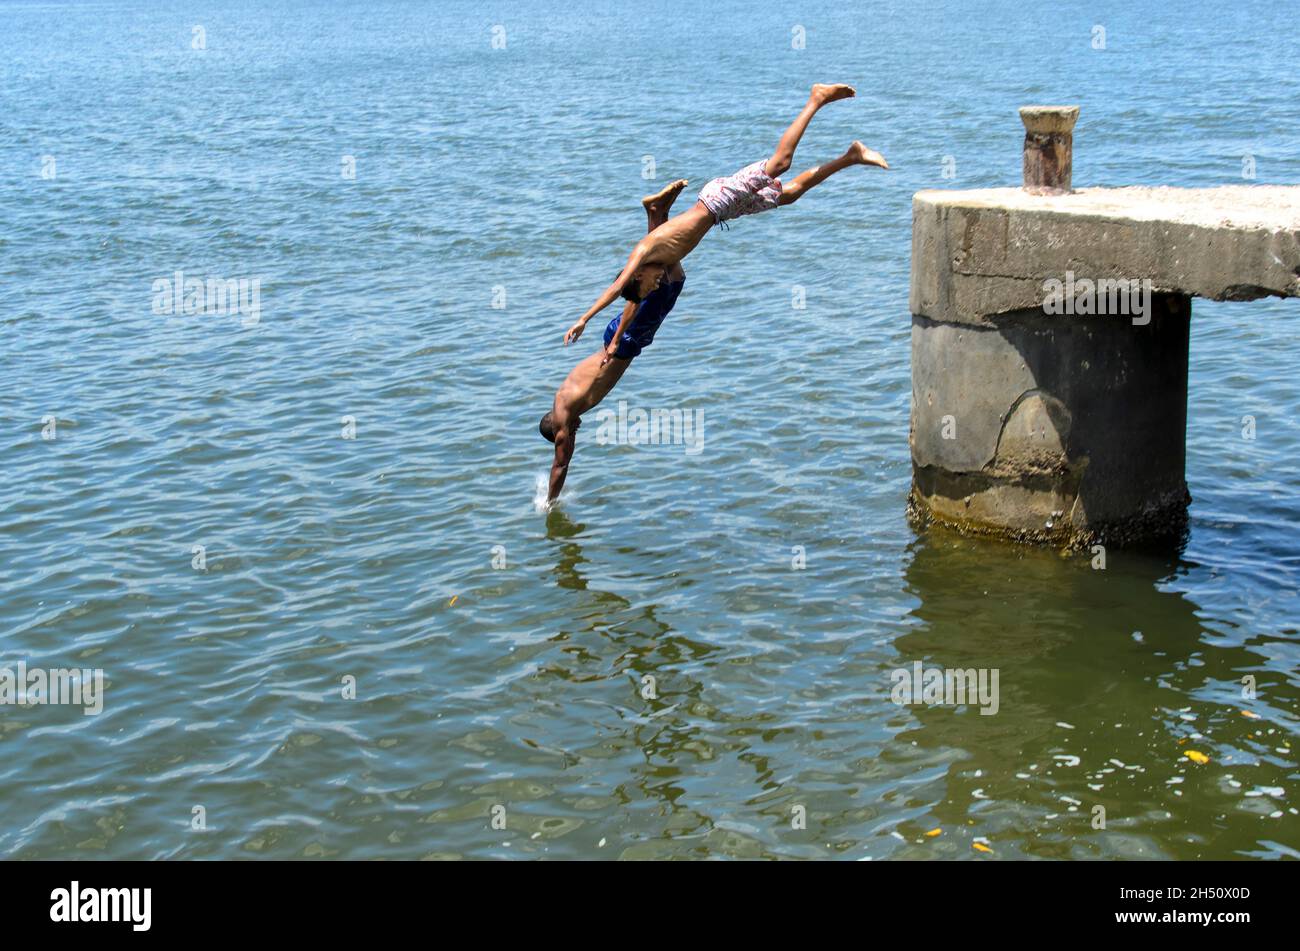 Cachoeira, Bahia, Brazil - November 29, 2014: Young people jumping from the deck of the Paraguacu River in Barra de Paraguacu, located in the Brazilia Stock Photo